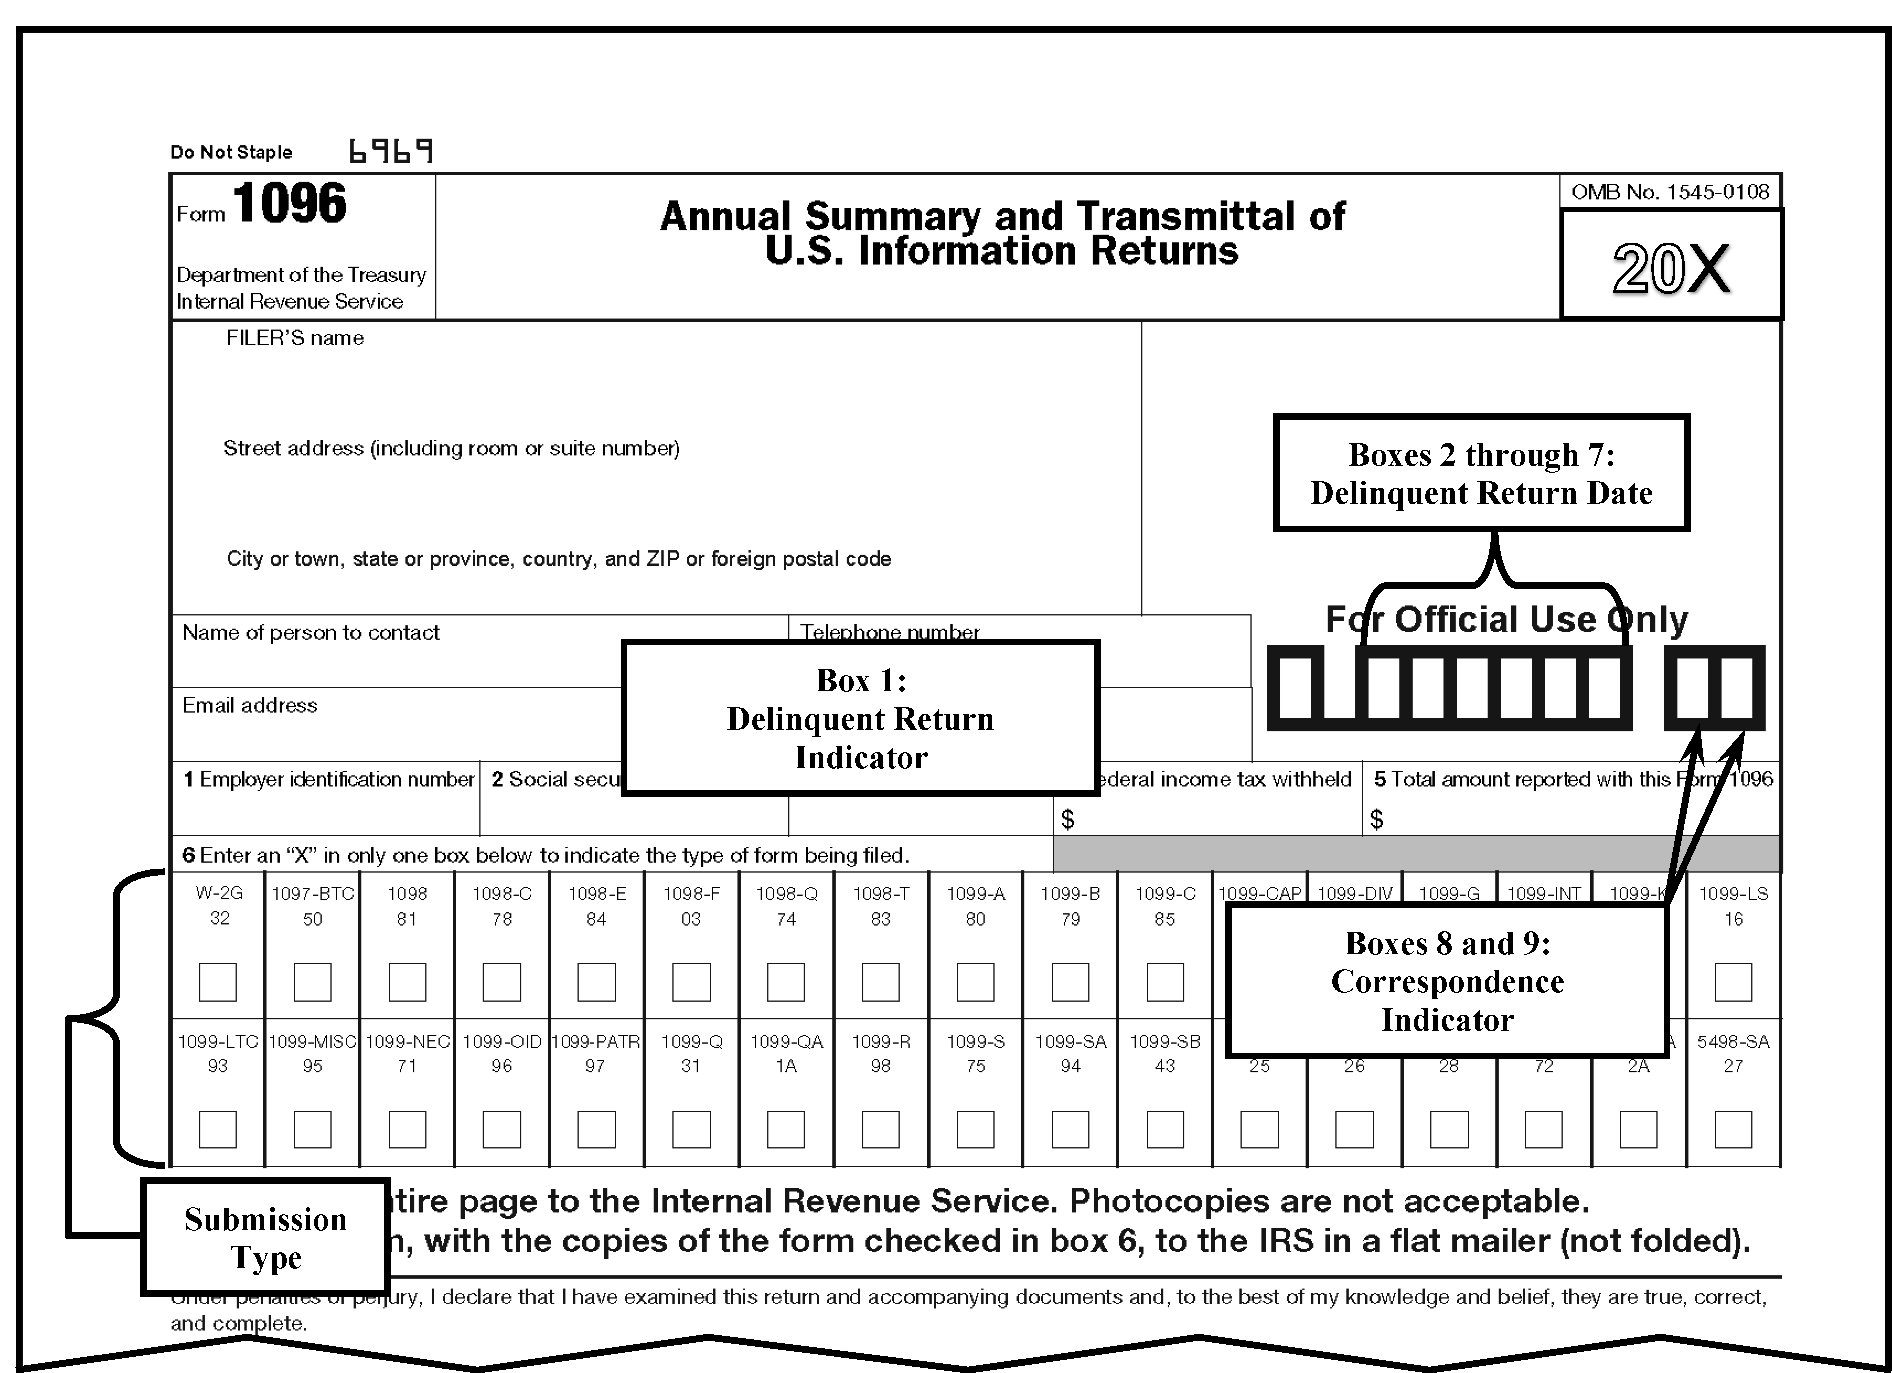 Use with MISC 1099 Year 2014 IRS Tax Form 1096 Annual Summary and Transmittal 